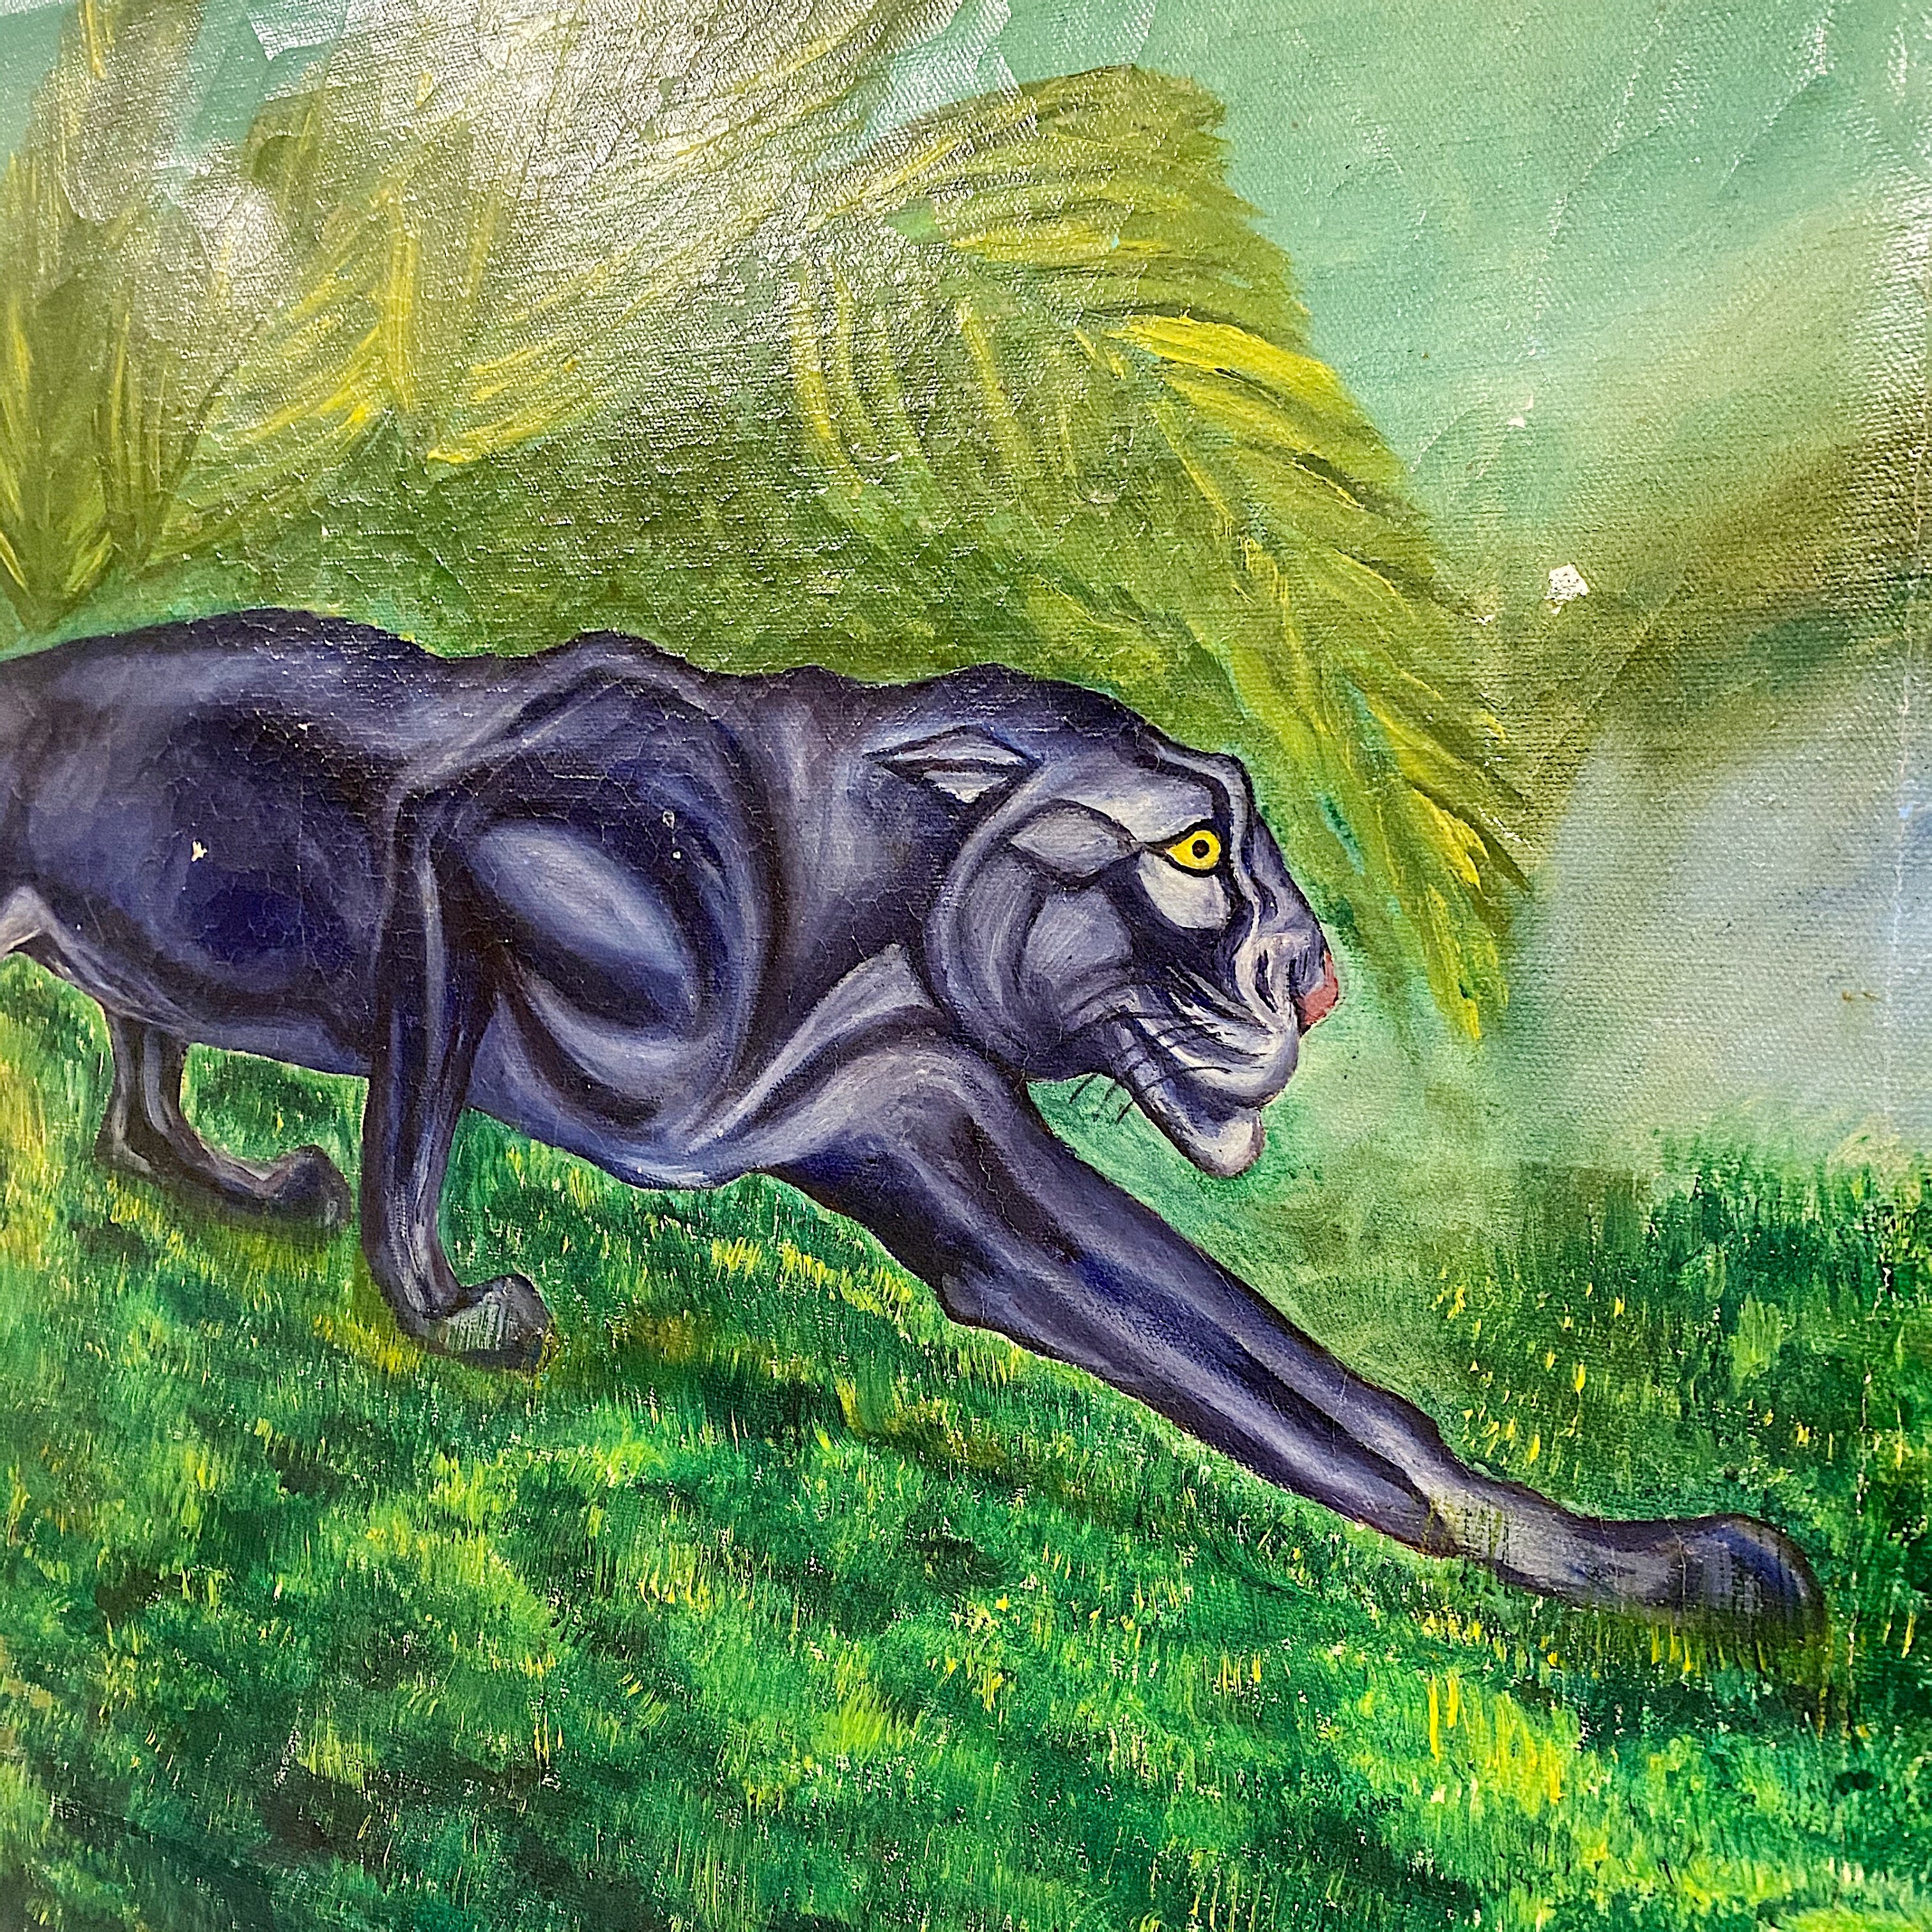 WPA Era Painting of Black Panther in Tropical Scene | 1950s